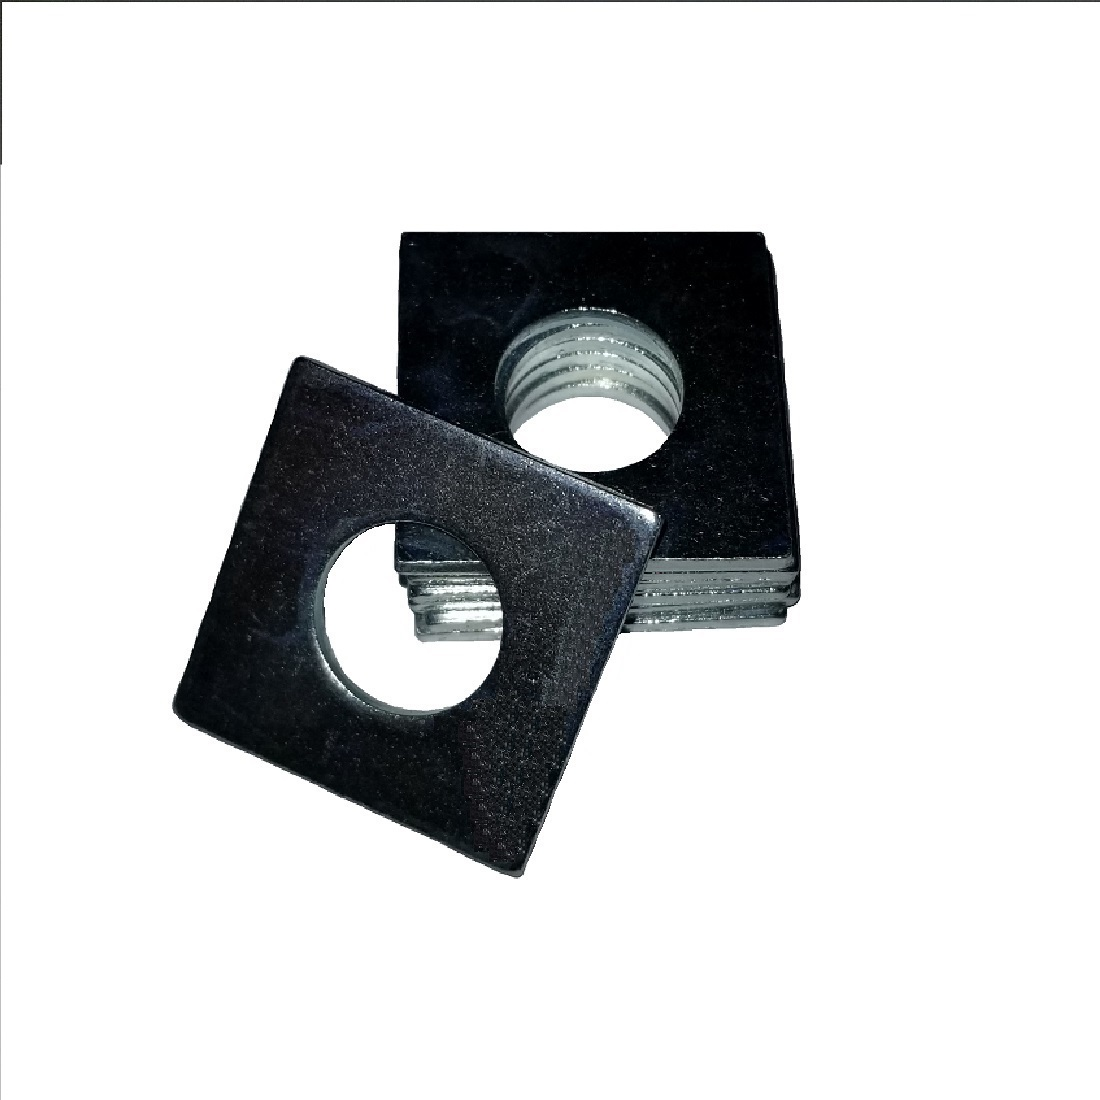 Square OD Washer - 0.562 ID, 2.000 OD, 0.250 Thick, Low Carbon Steel - Soft